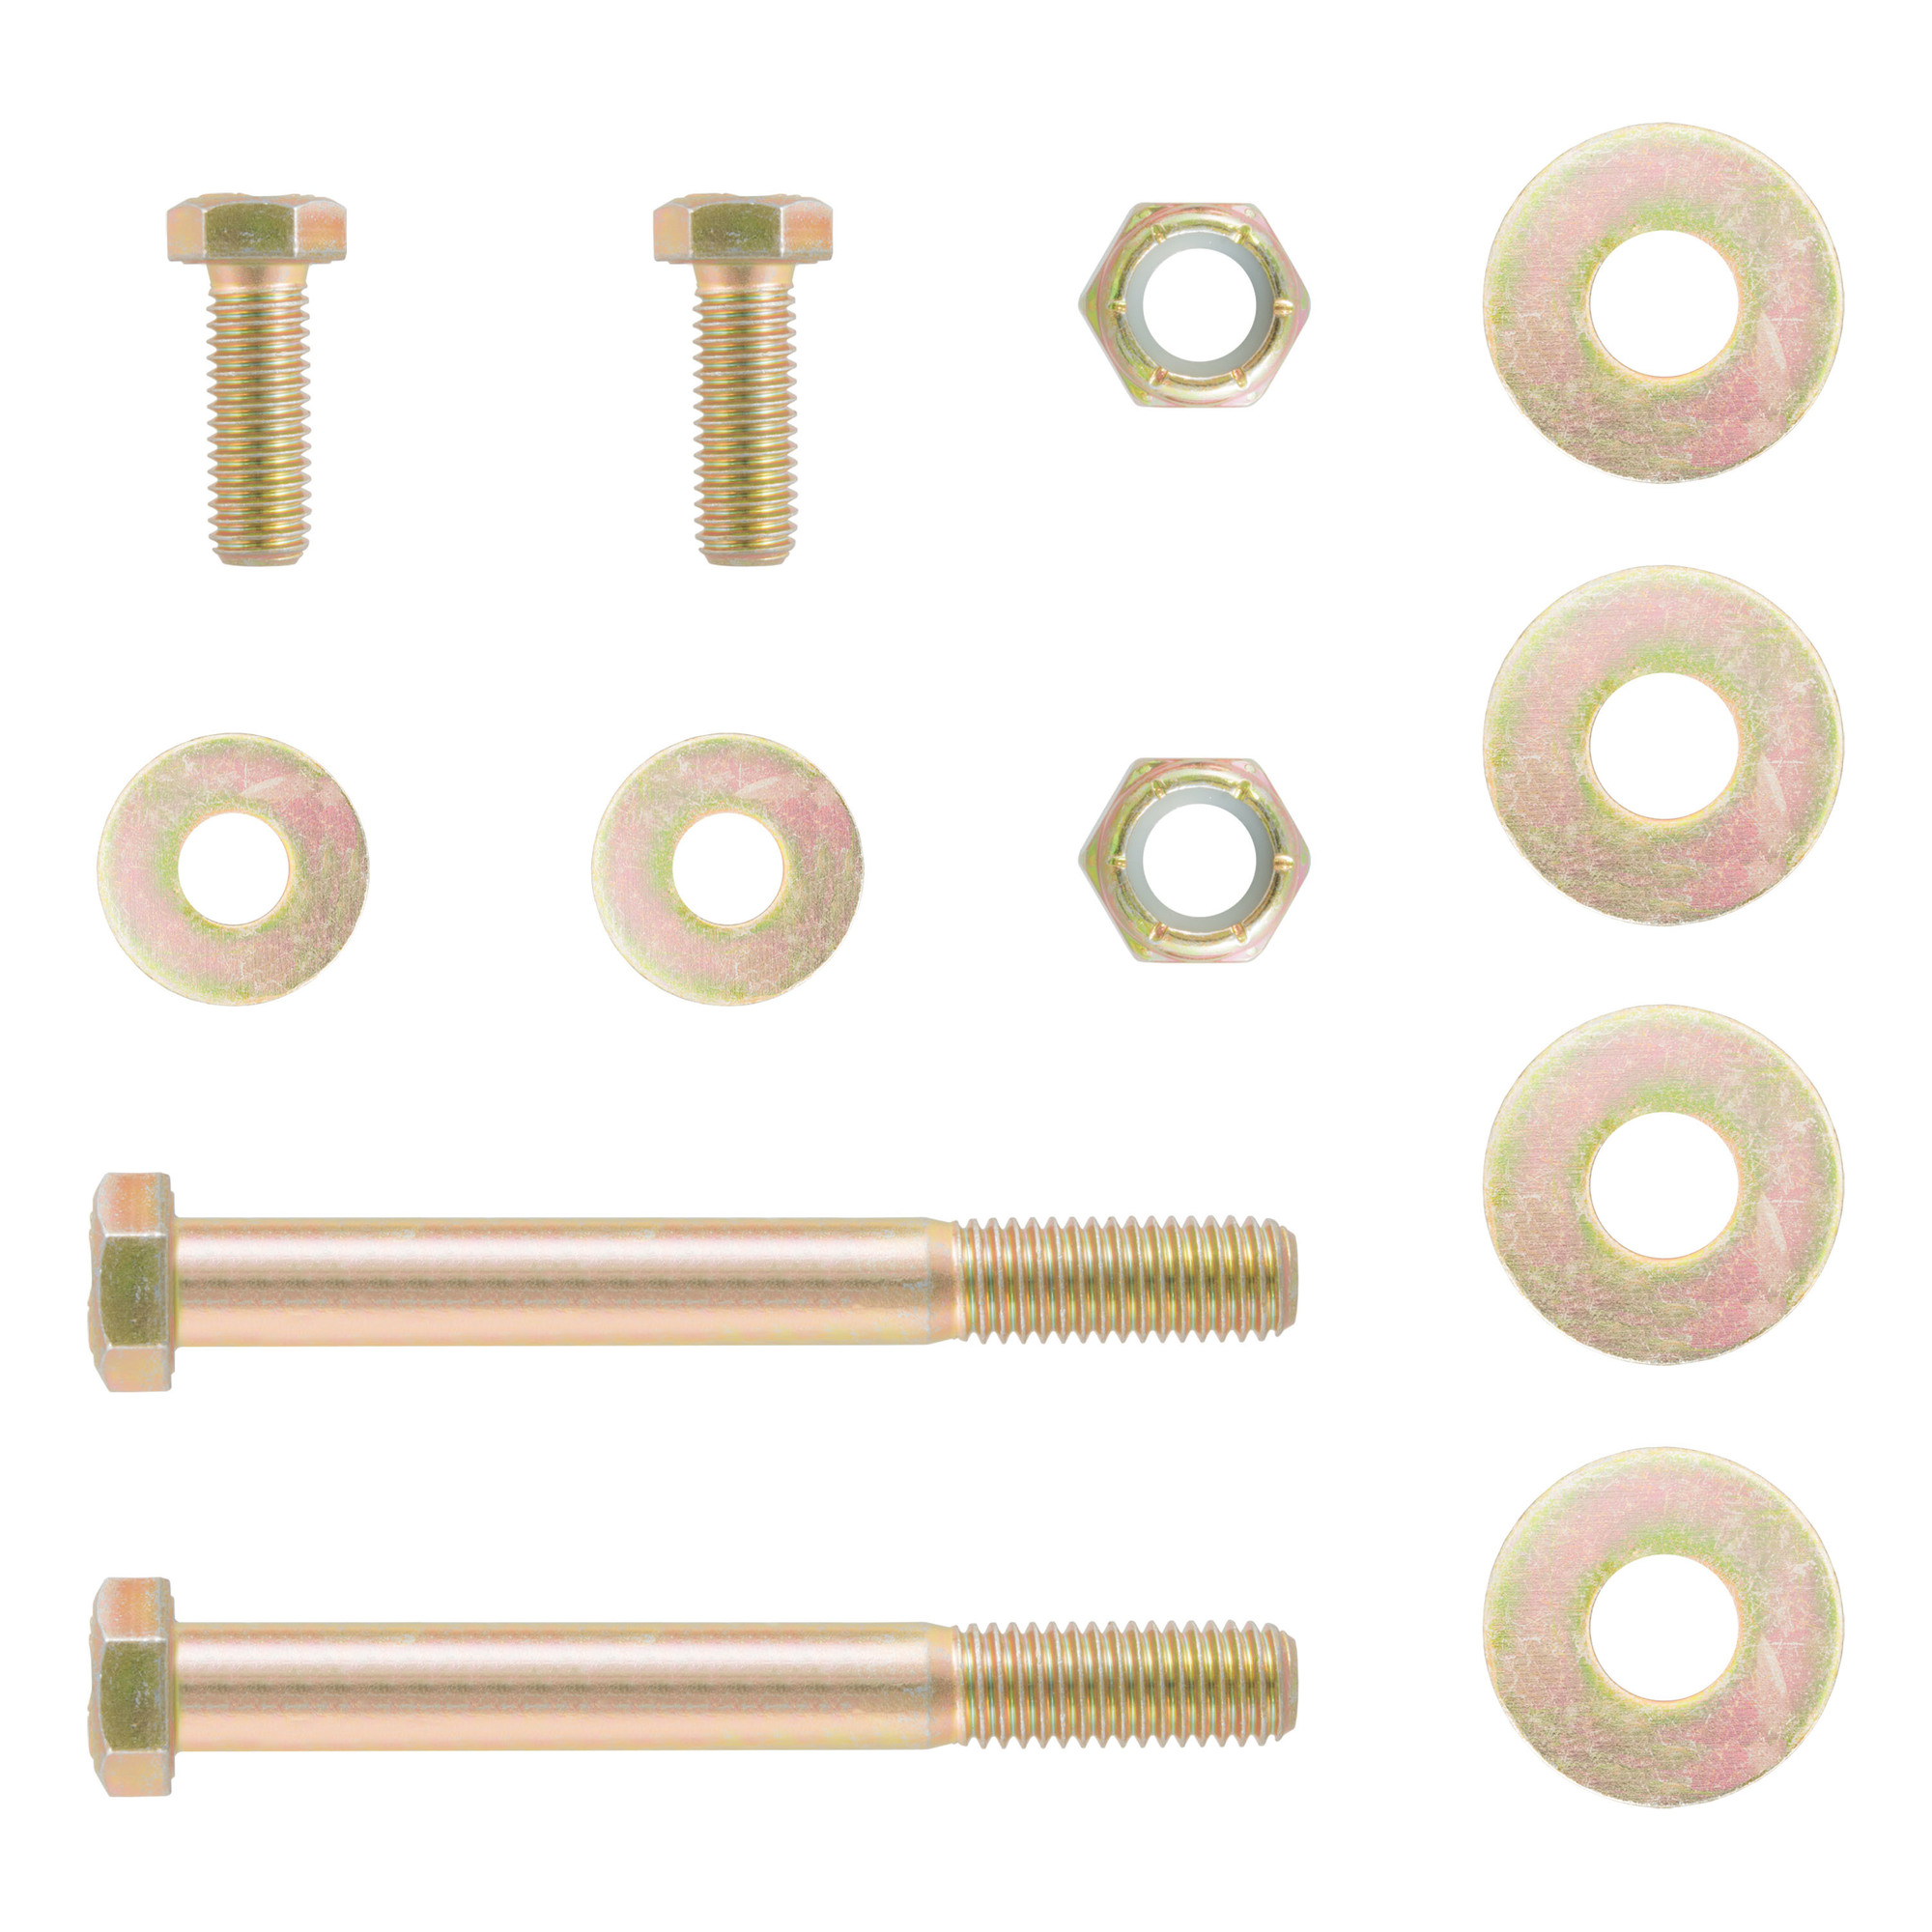 Curt Manufacturing, Channel-Style Lunette Ring Hardware Kit, Material Multiple, Model 48620